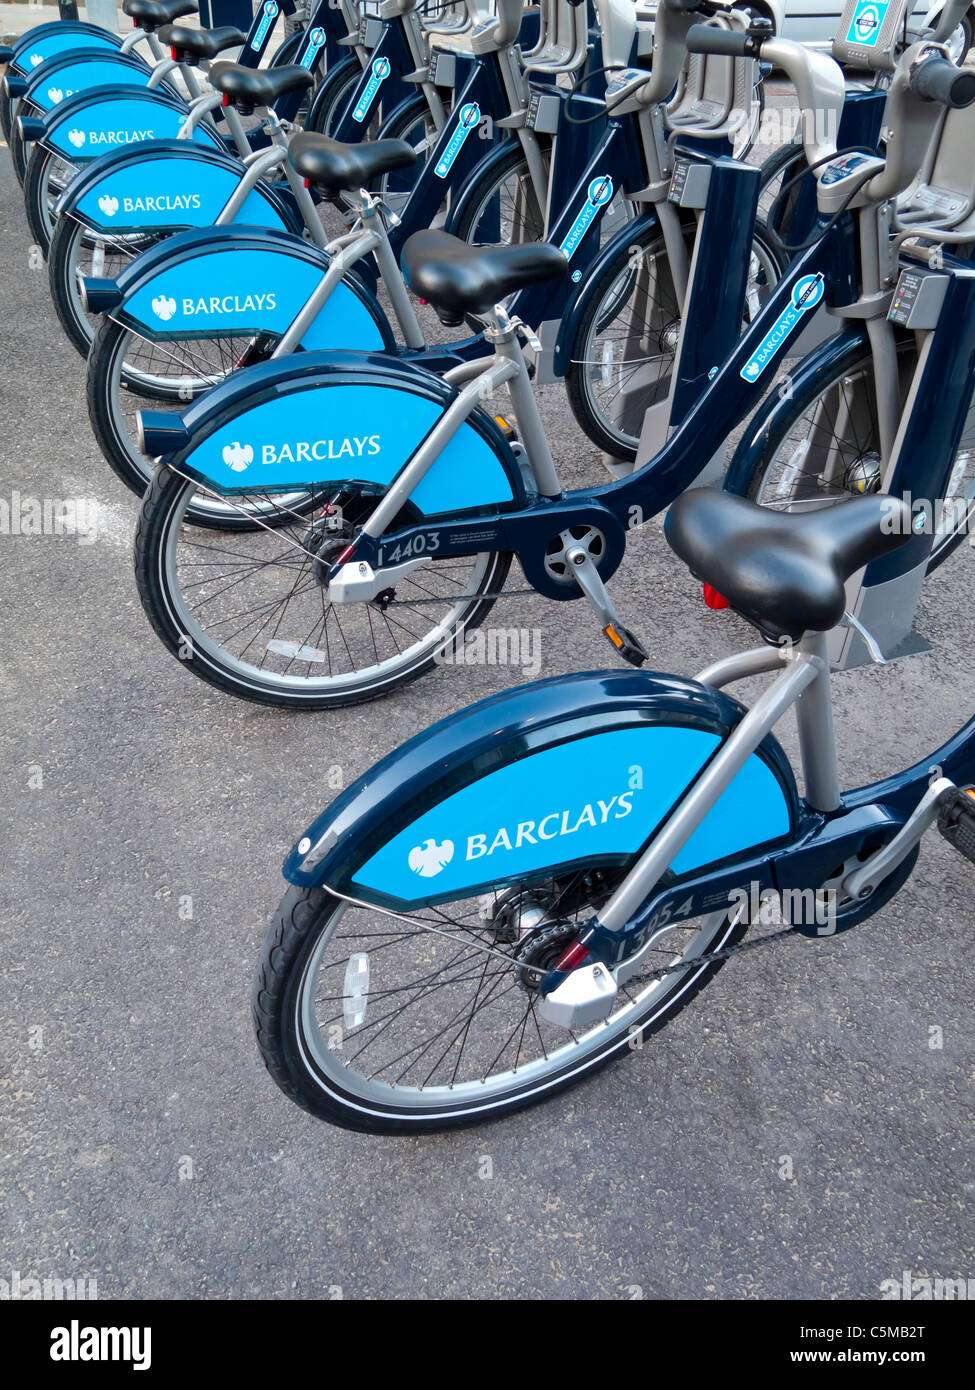 Barclays Cycle Hire BCH bikes parked in London England where they are used as a public bicycle sharing scheme launched in 2010 Stock Photo